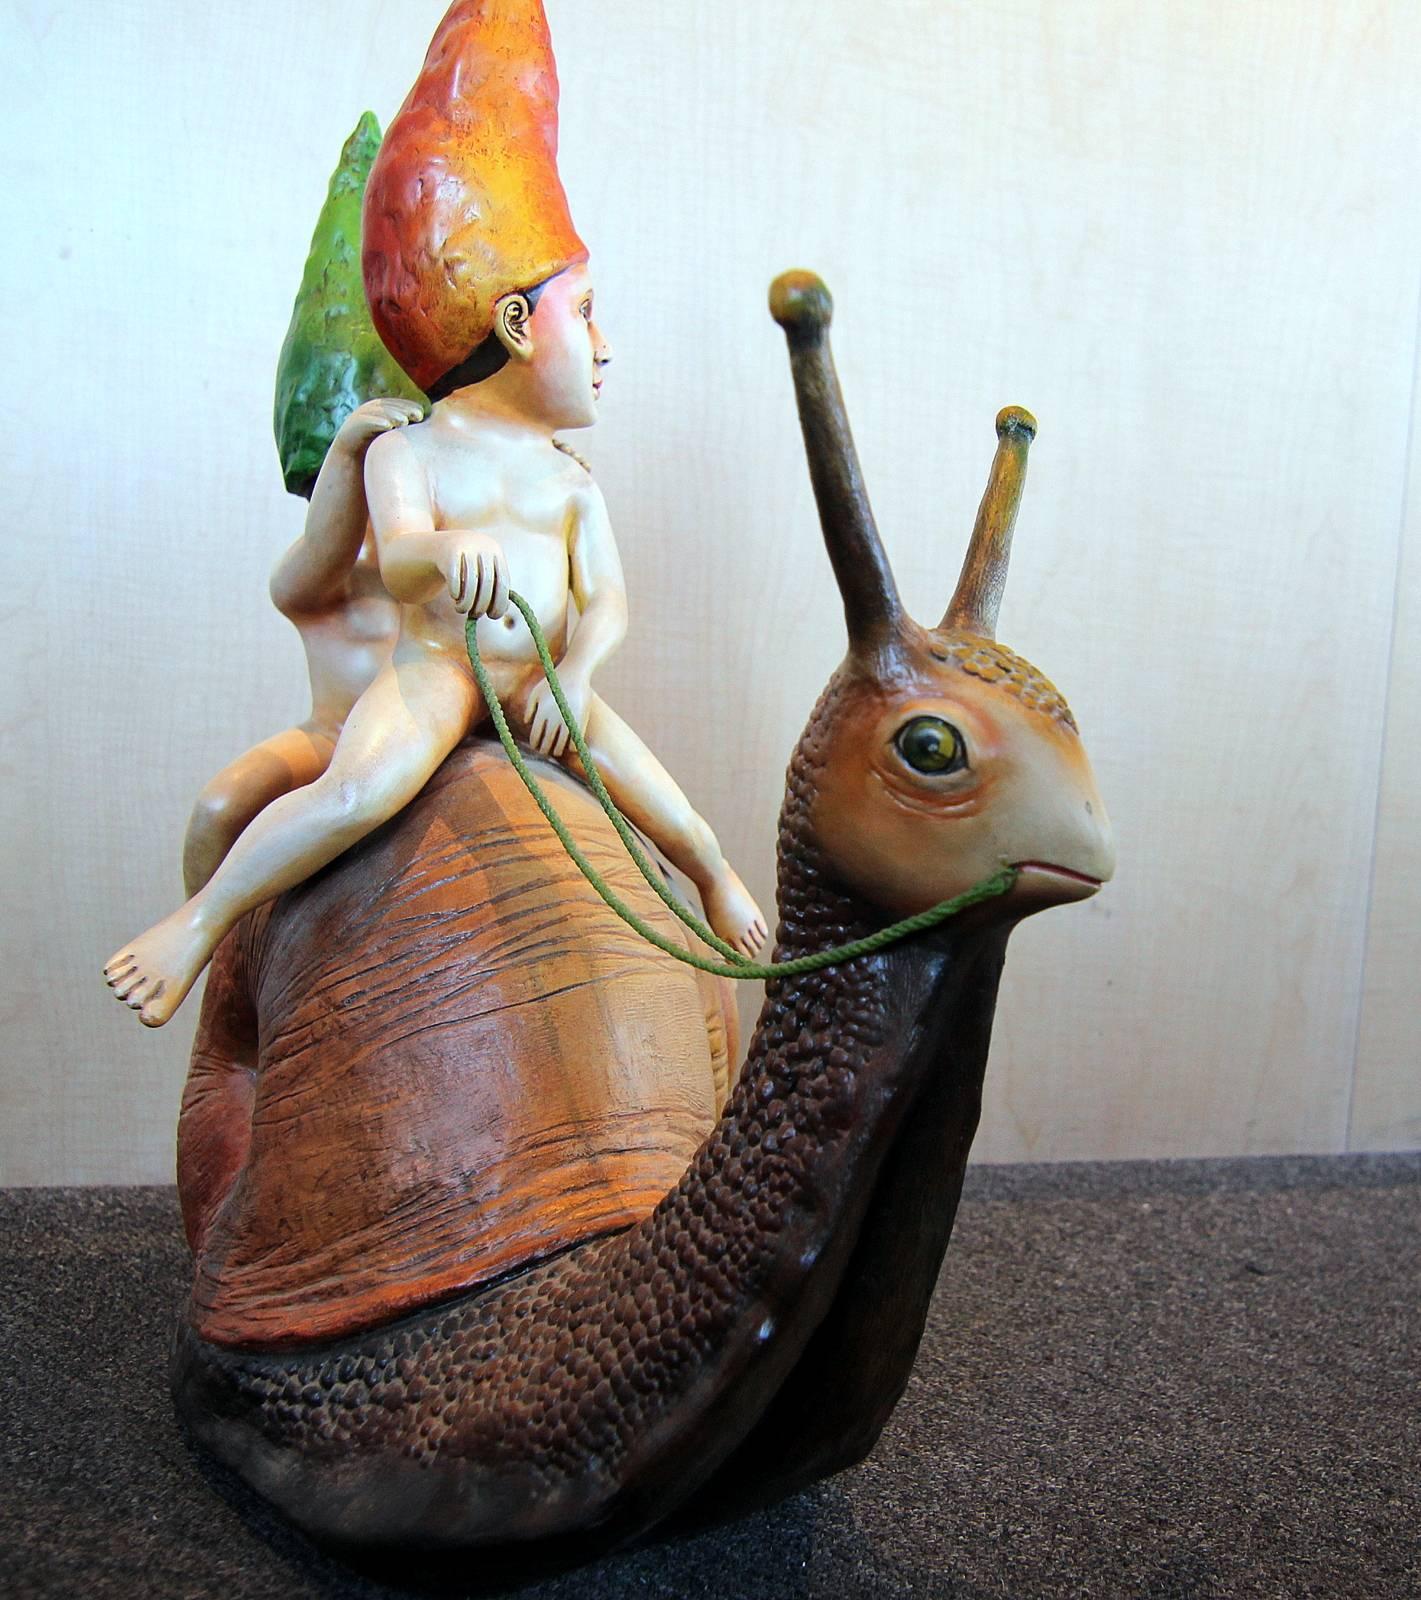 Resin sculpture of a two young boys riding a snail by Mexican artist Sergio Bustamante. The piece is hand signed and numbered 2/100 and was made in the mid-1980s. Great color and detail!